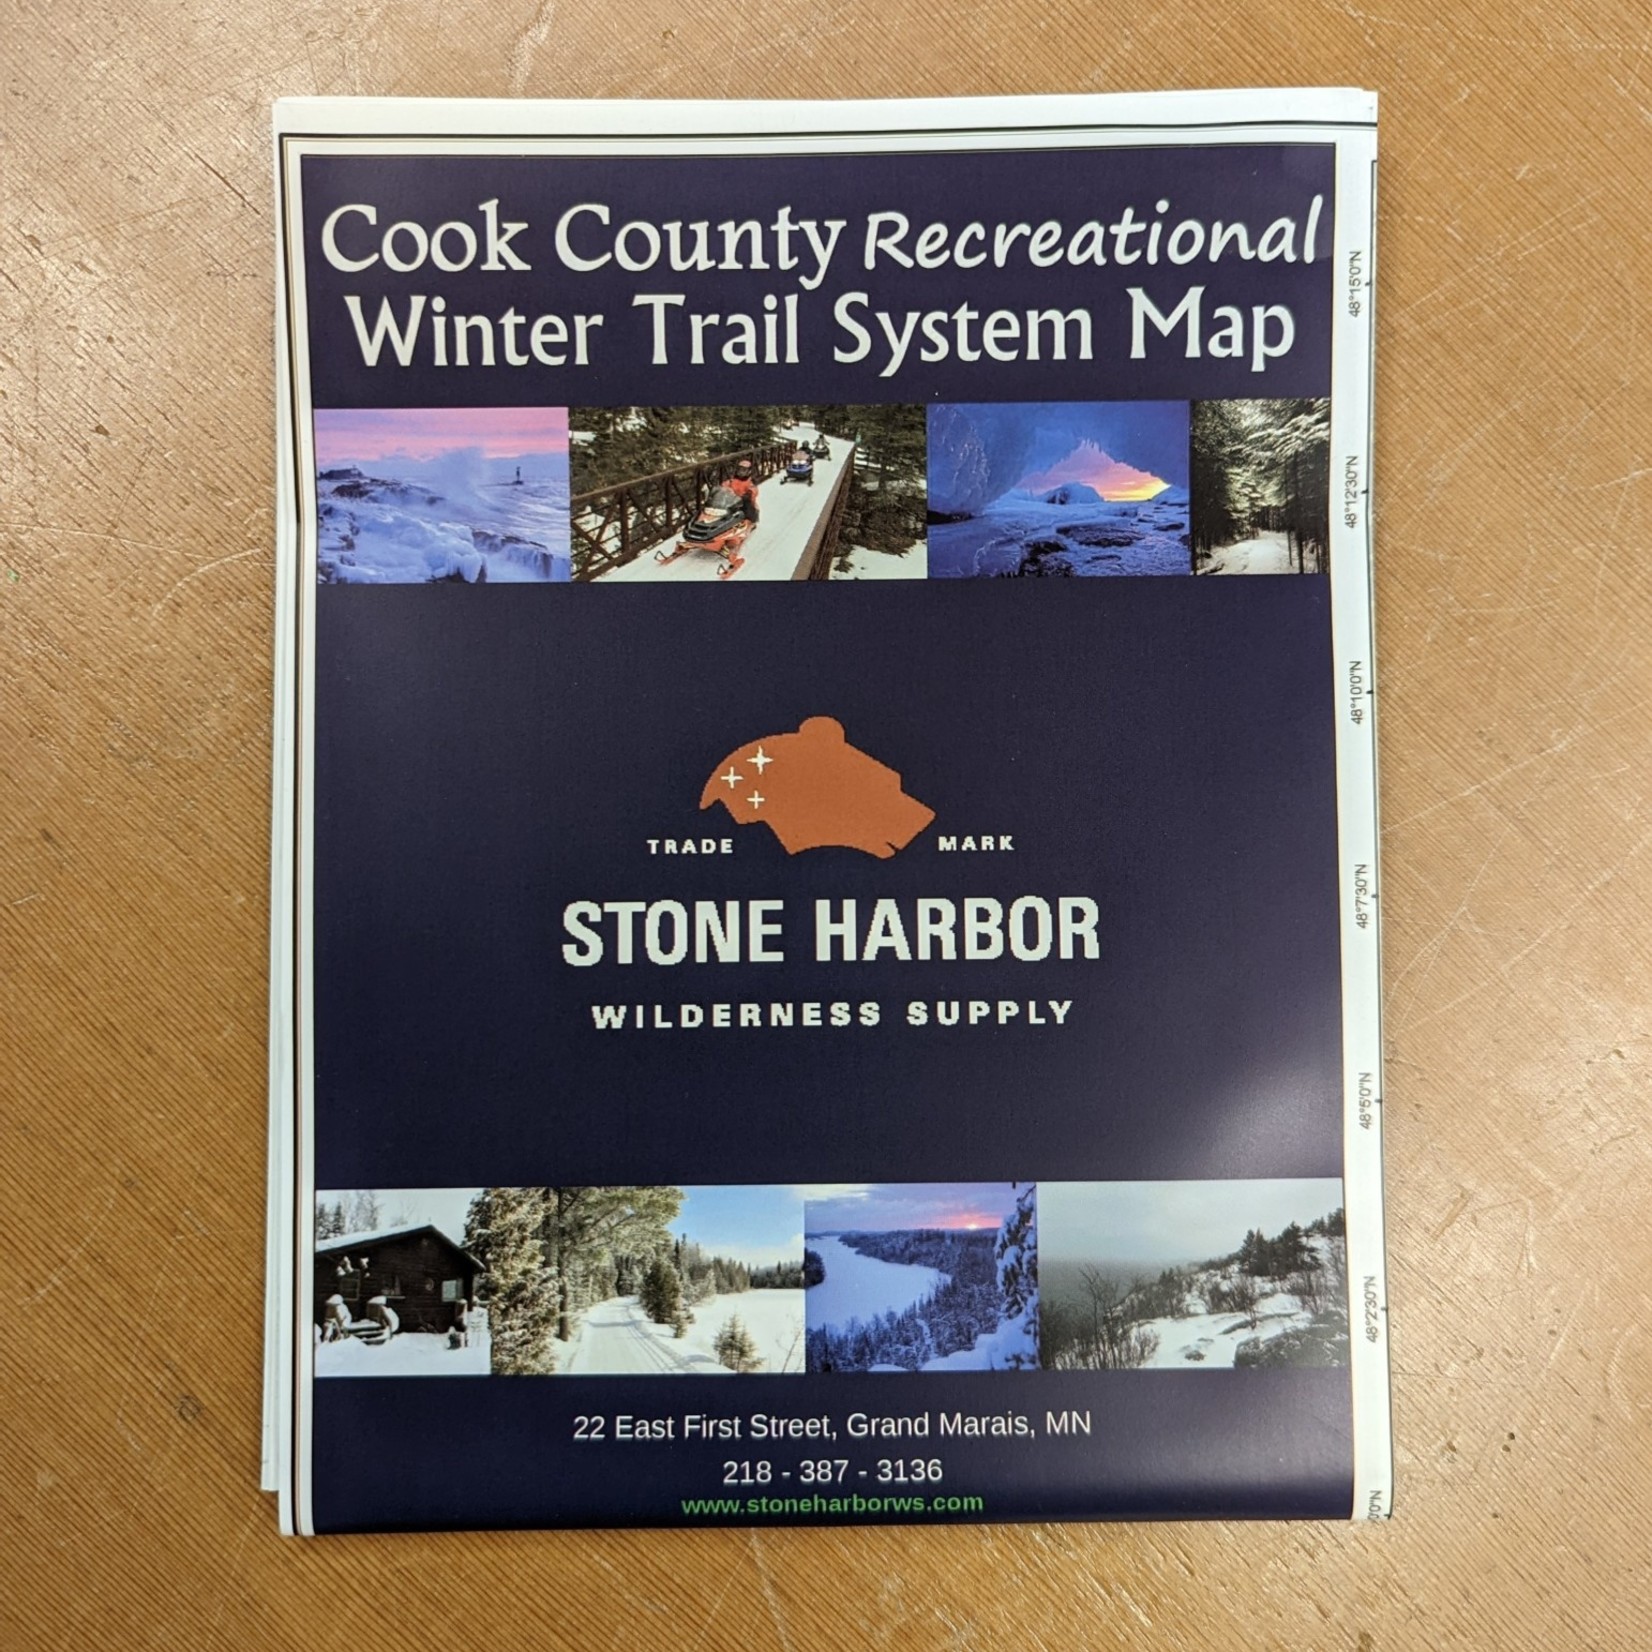 Stone Harbor Cook County Summer/Winter Trails